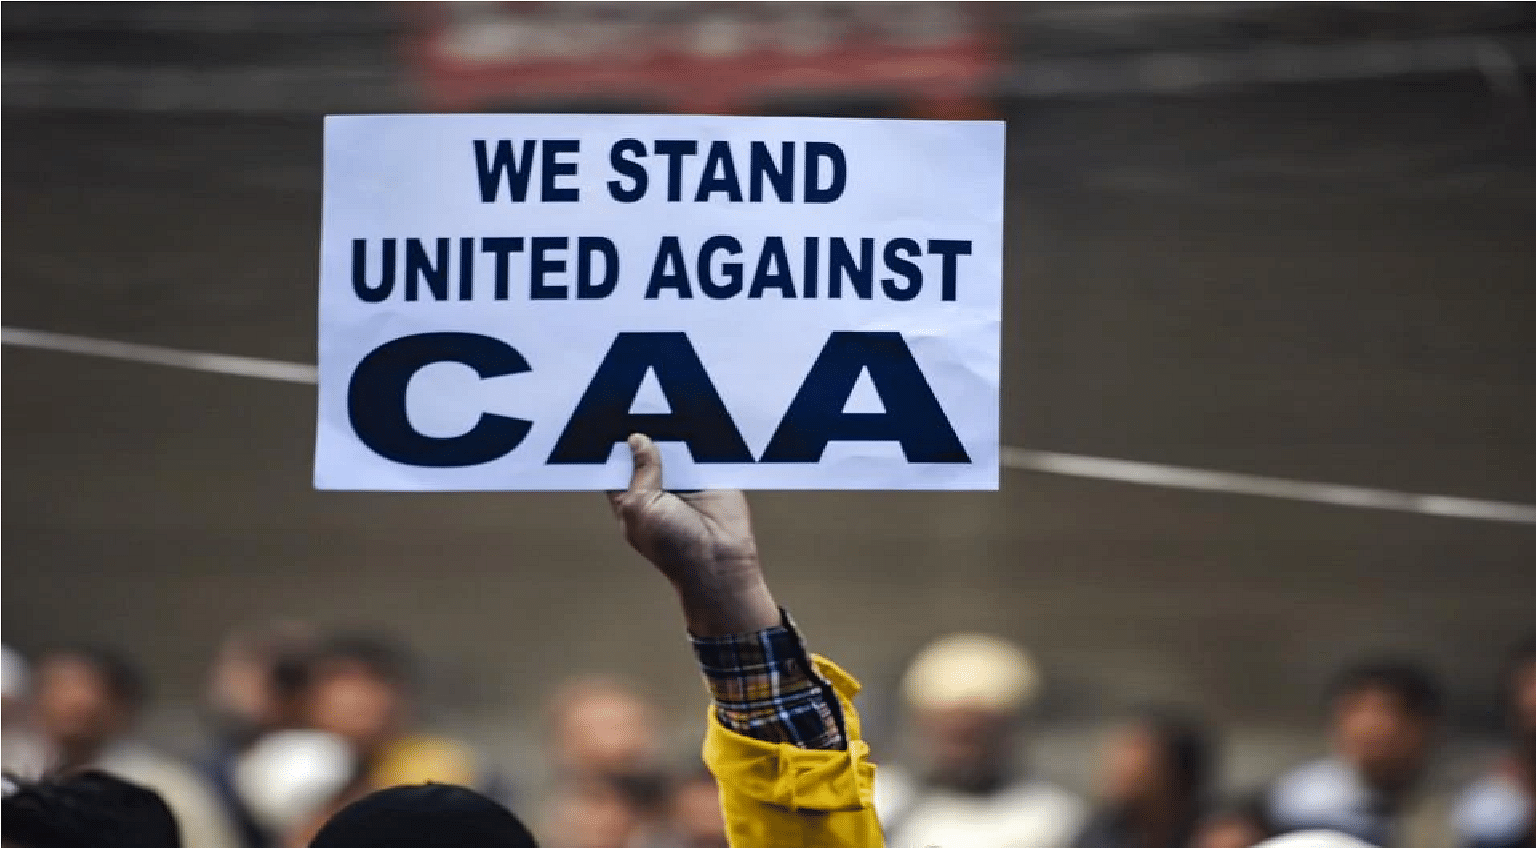 man was protesting against CAA in Singapore, police searching for him